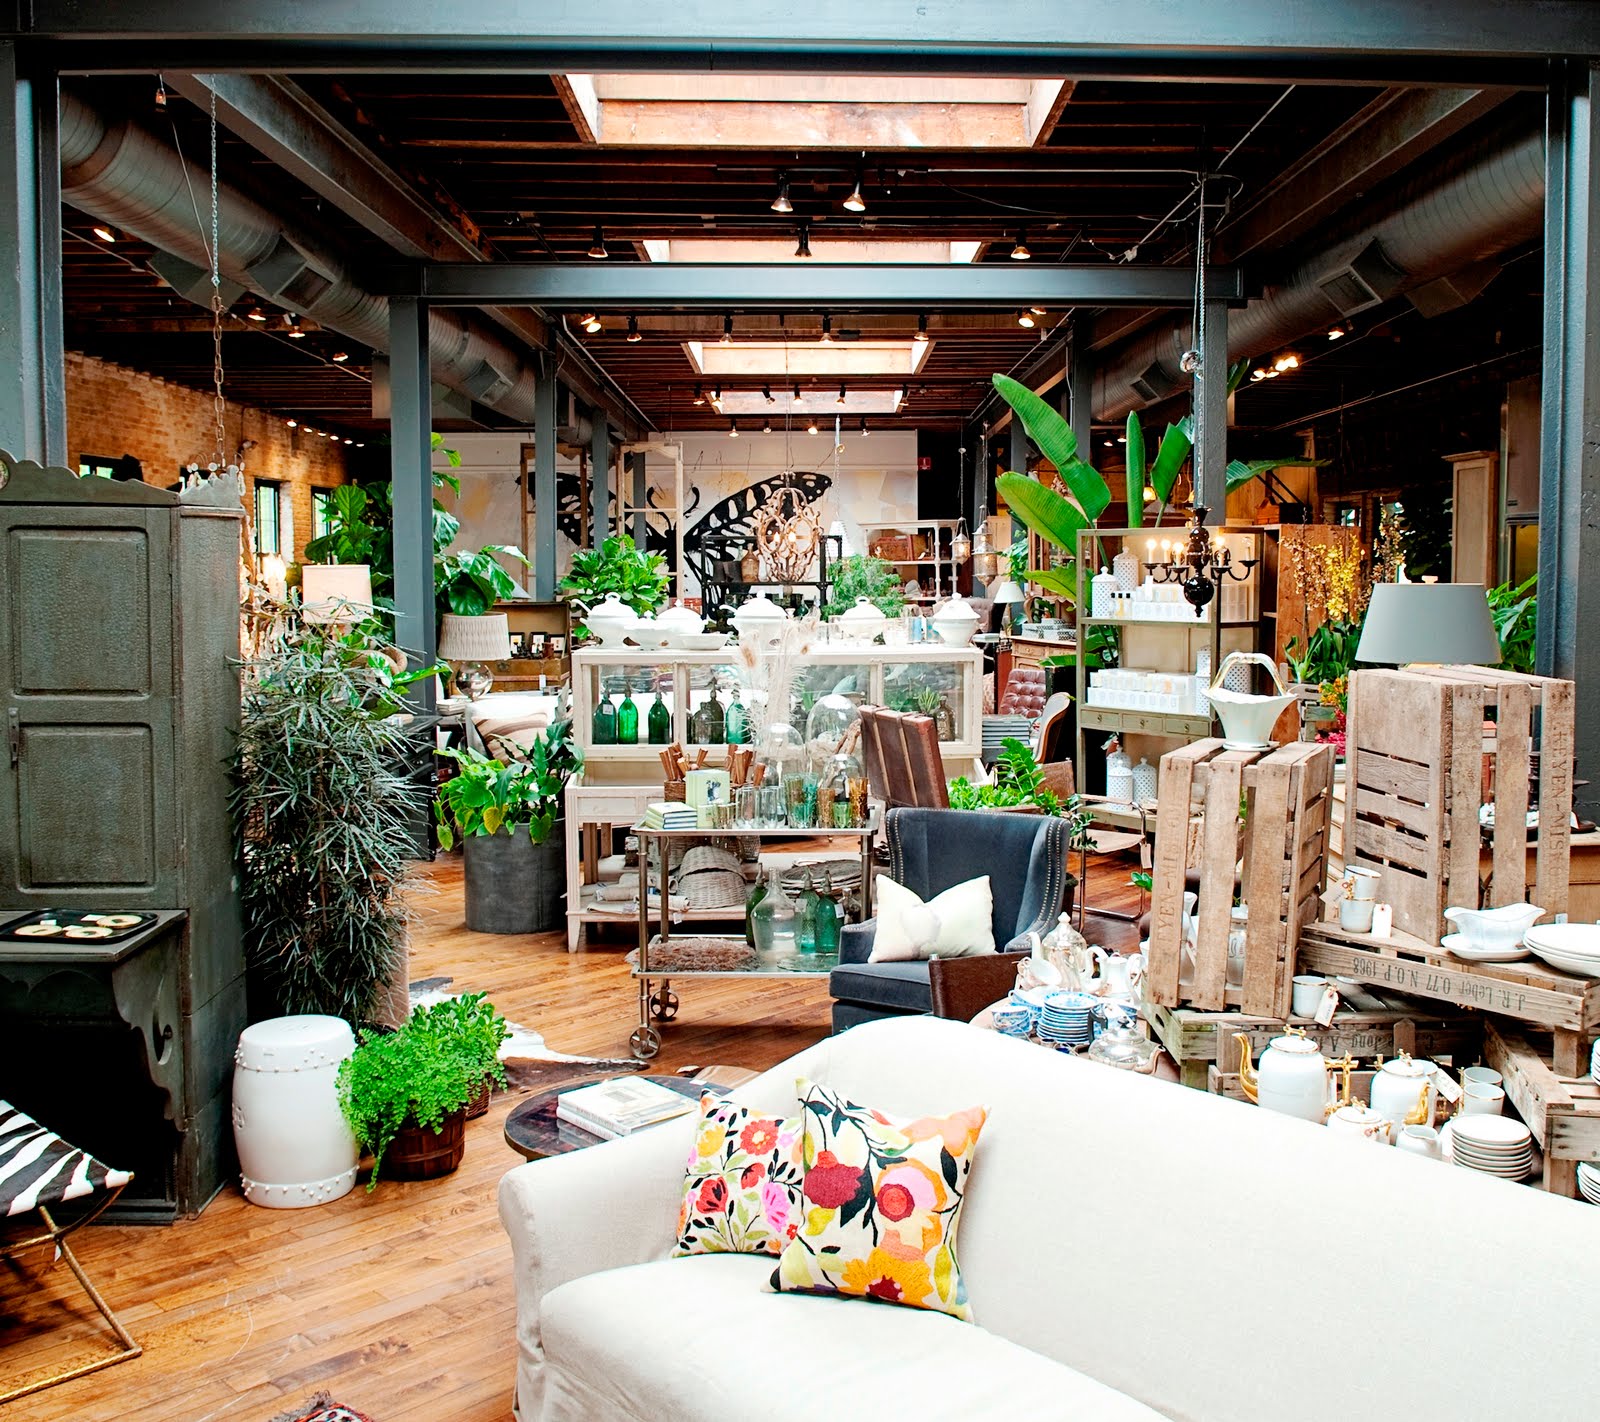 Transform Your Space with Home and Garden Supplies